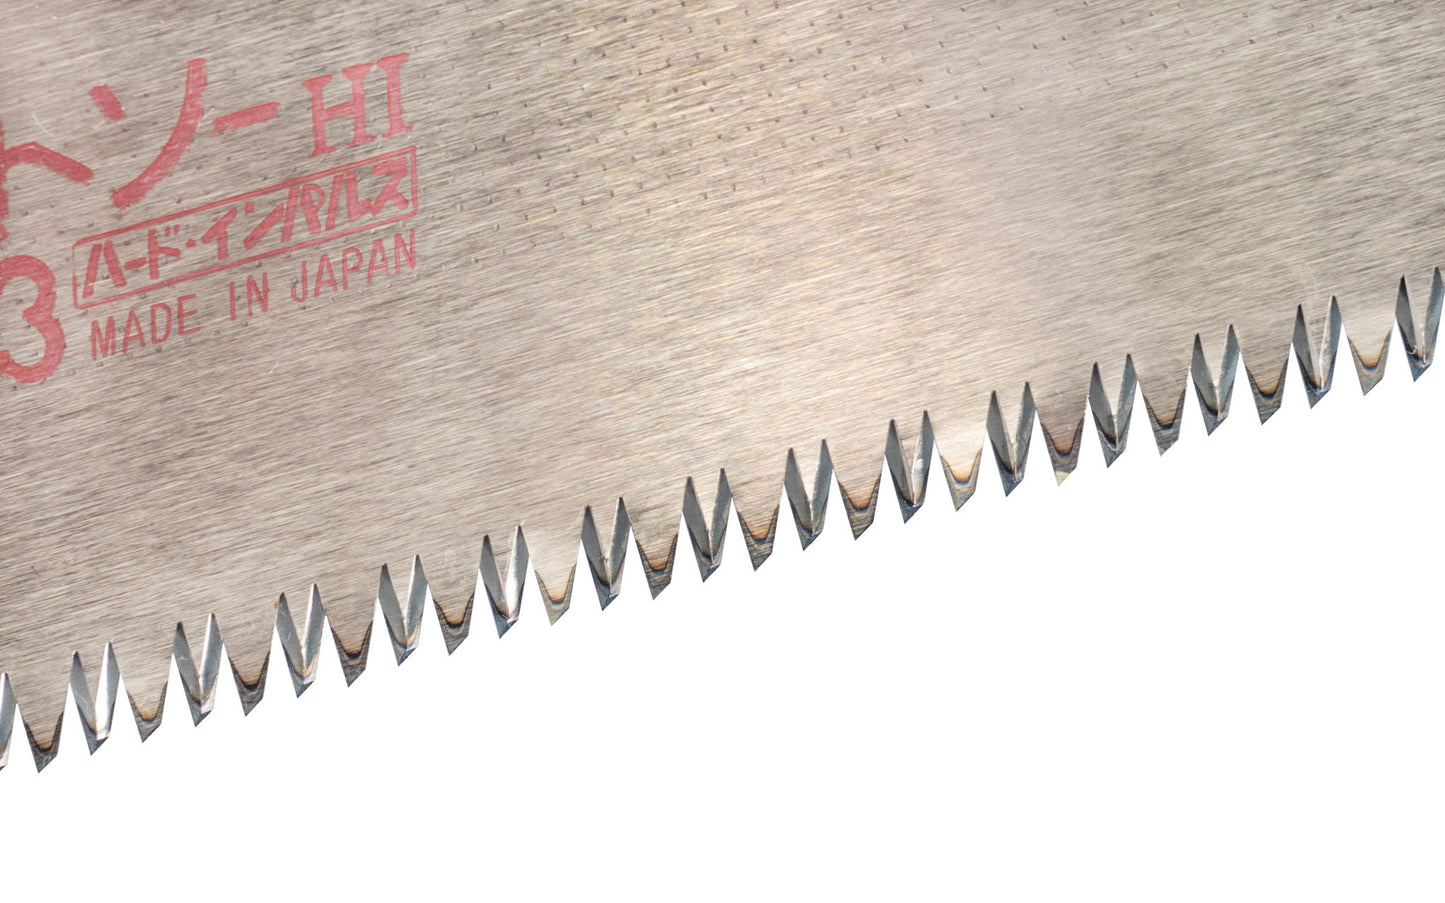 Made in Japan Z-Saw #H-333 | #15014 ~ Crosscut Teeth: 10 TPI ~ Heavy duty & extra coarse pull-saw ~ Impulse Hardened Teeth ~ Blade is removable ~ For timber framing & general construction, for house framing & or 2 x 4  or 2 x 8 materials ~ The handle is extra long too for longer & more powerful strokes